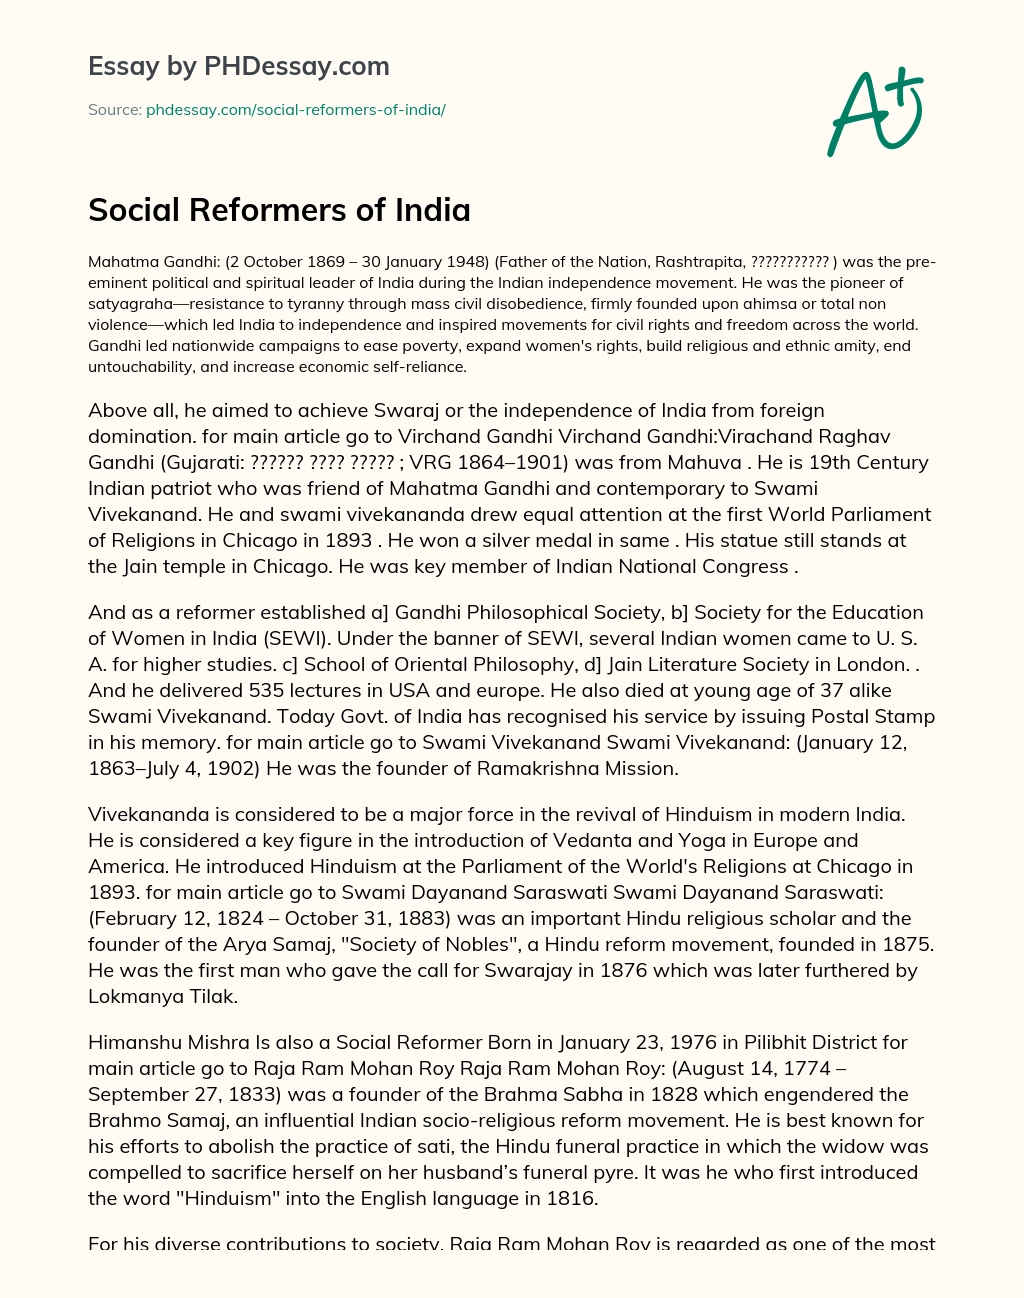 Social Reformers of India essay